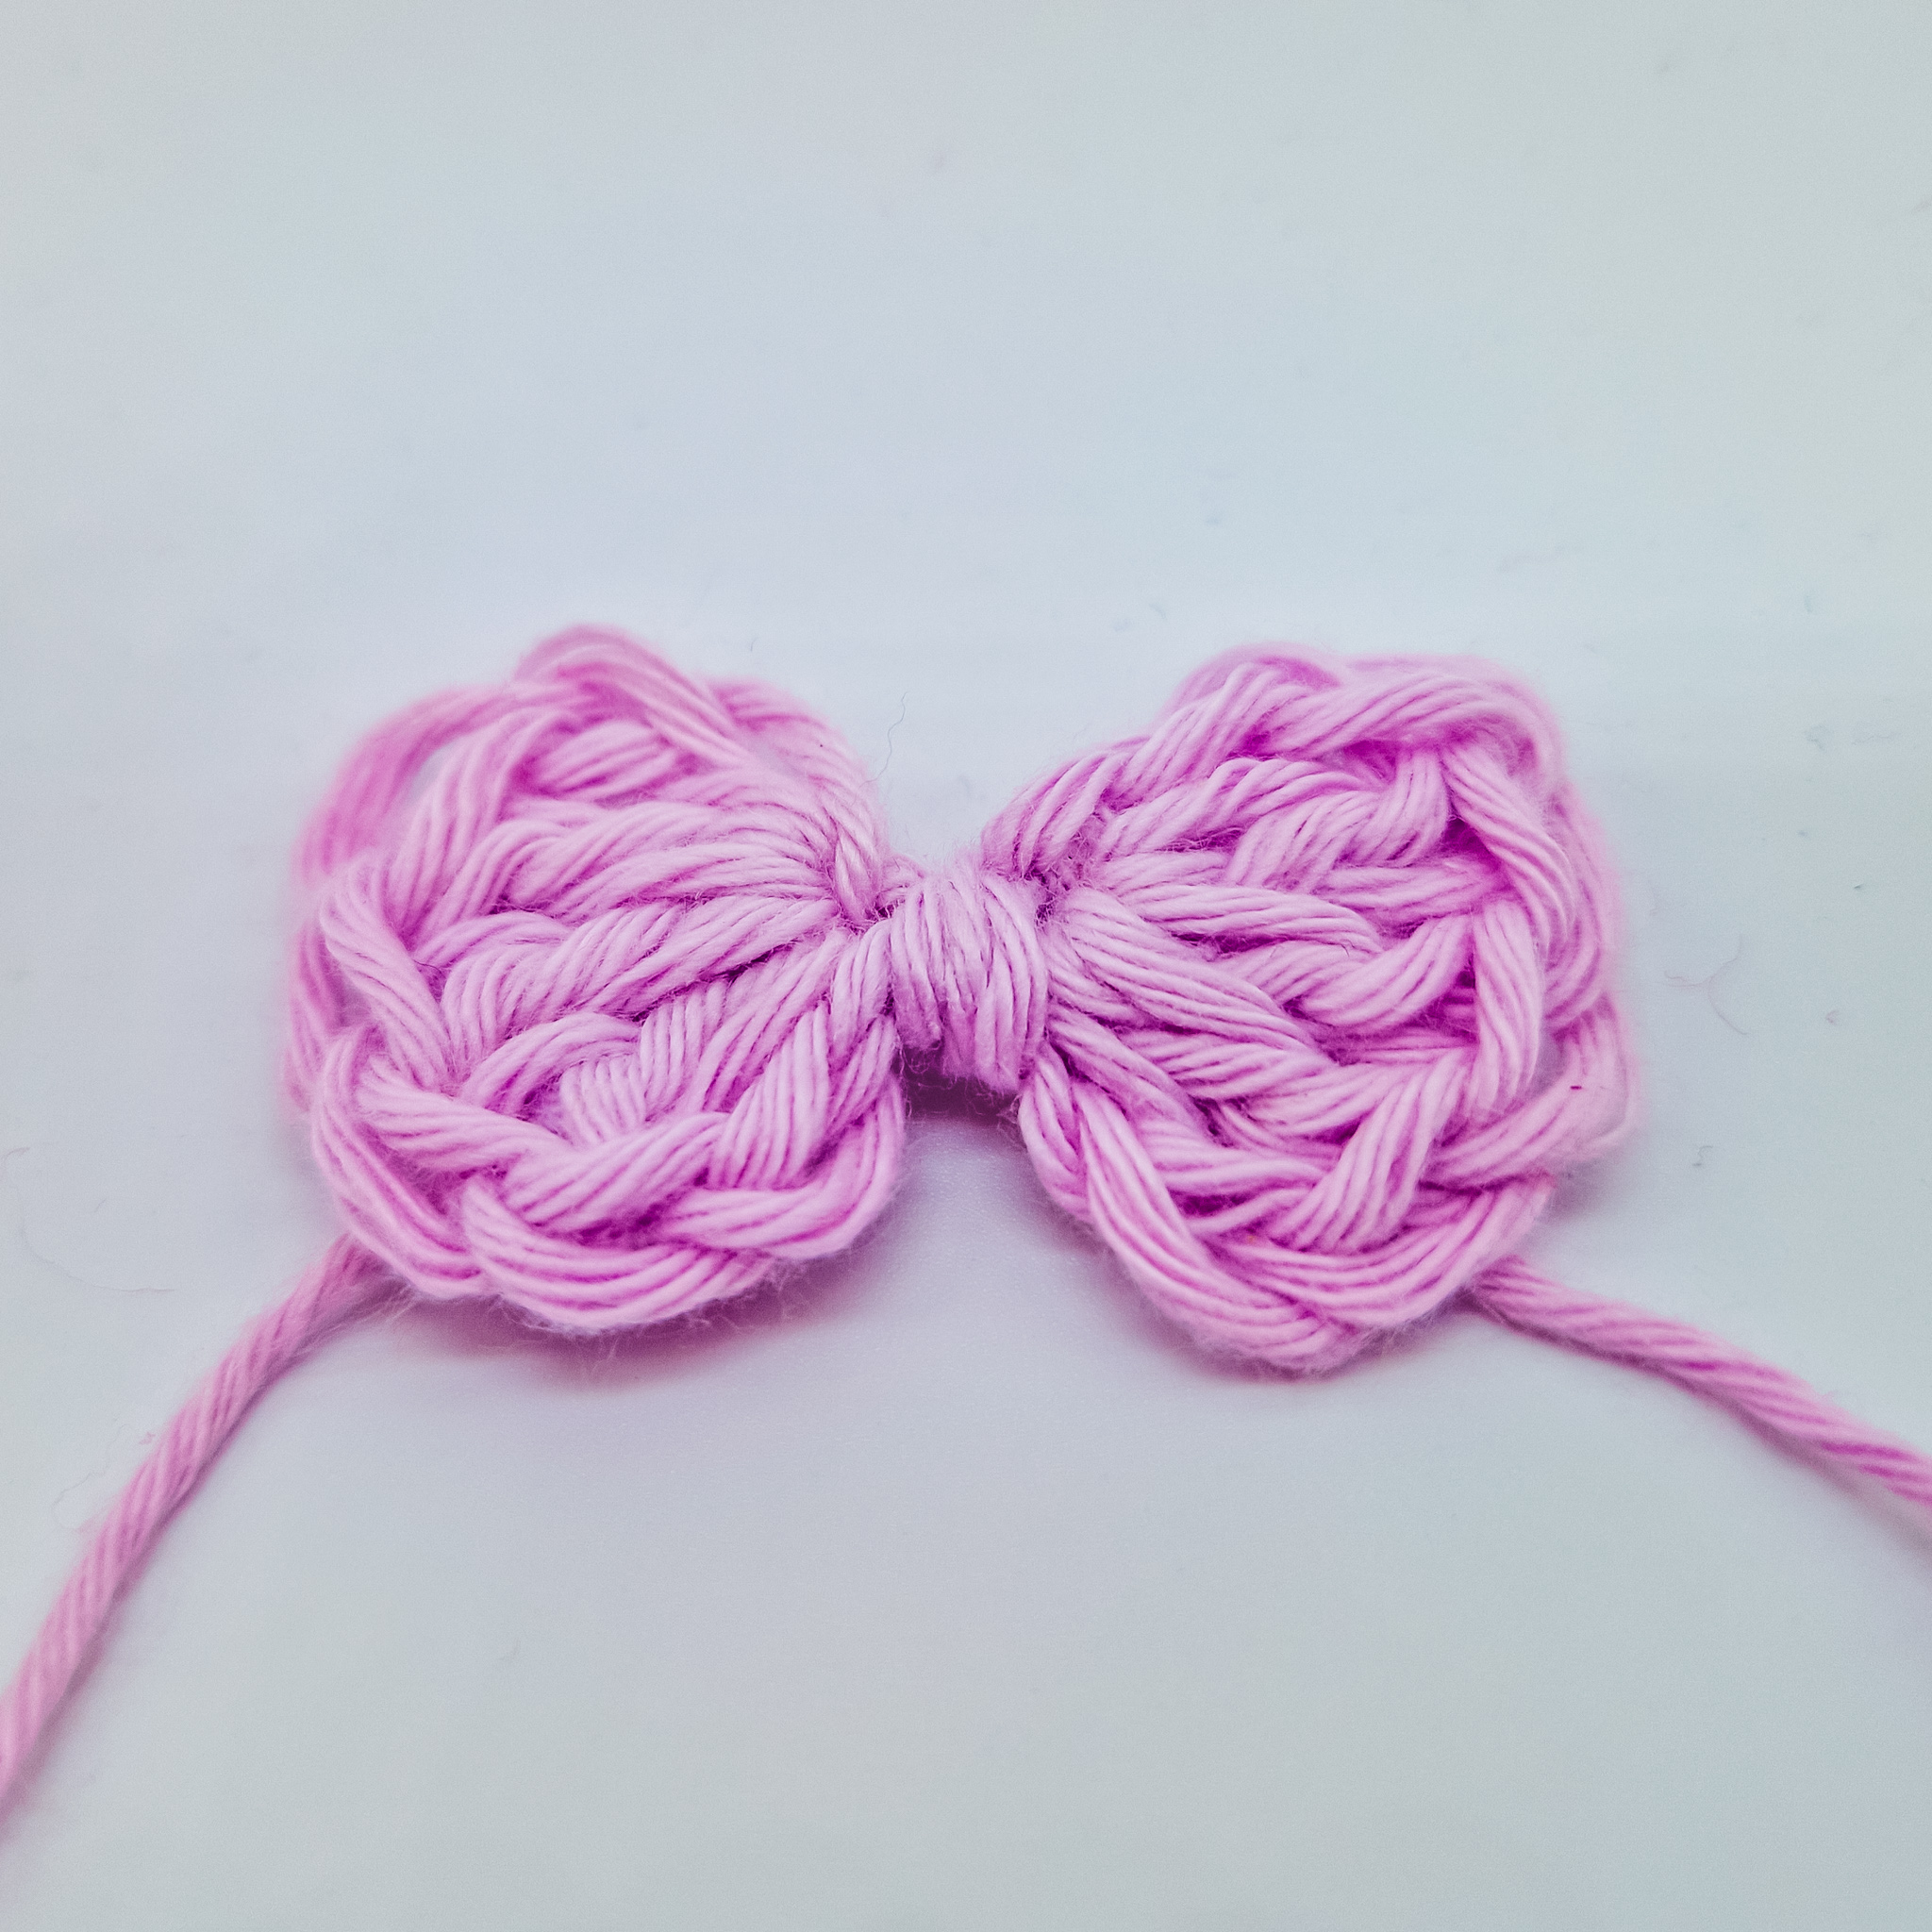 How to Crochet a Simple Bow